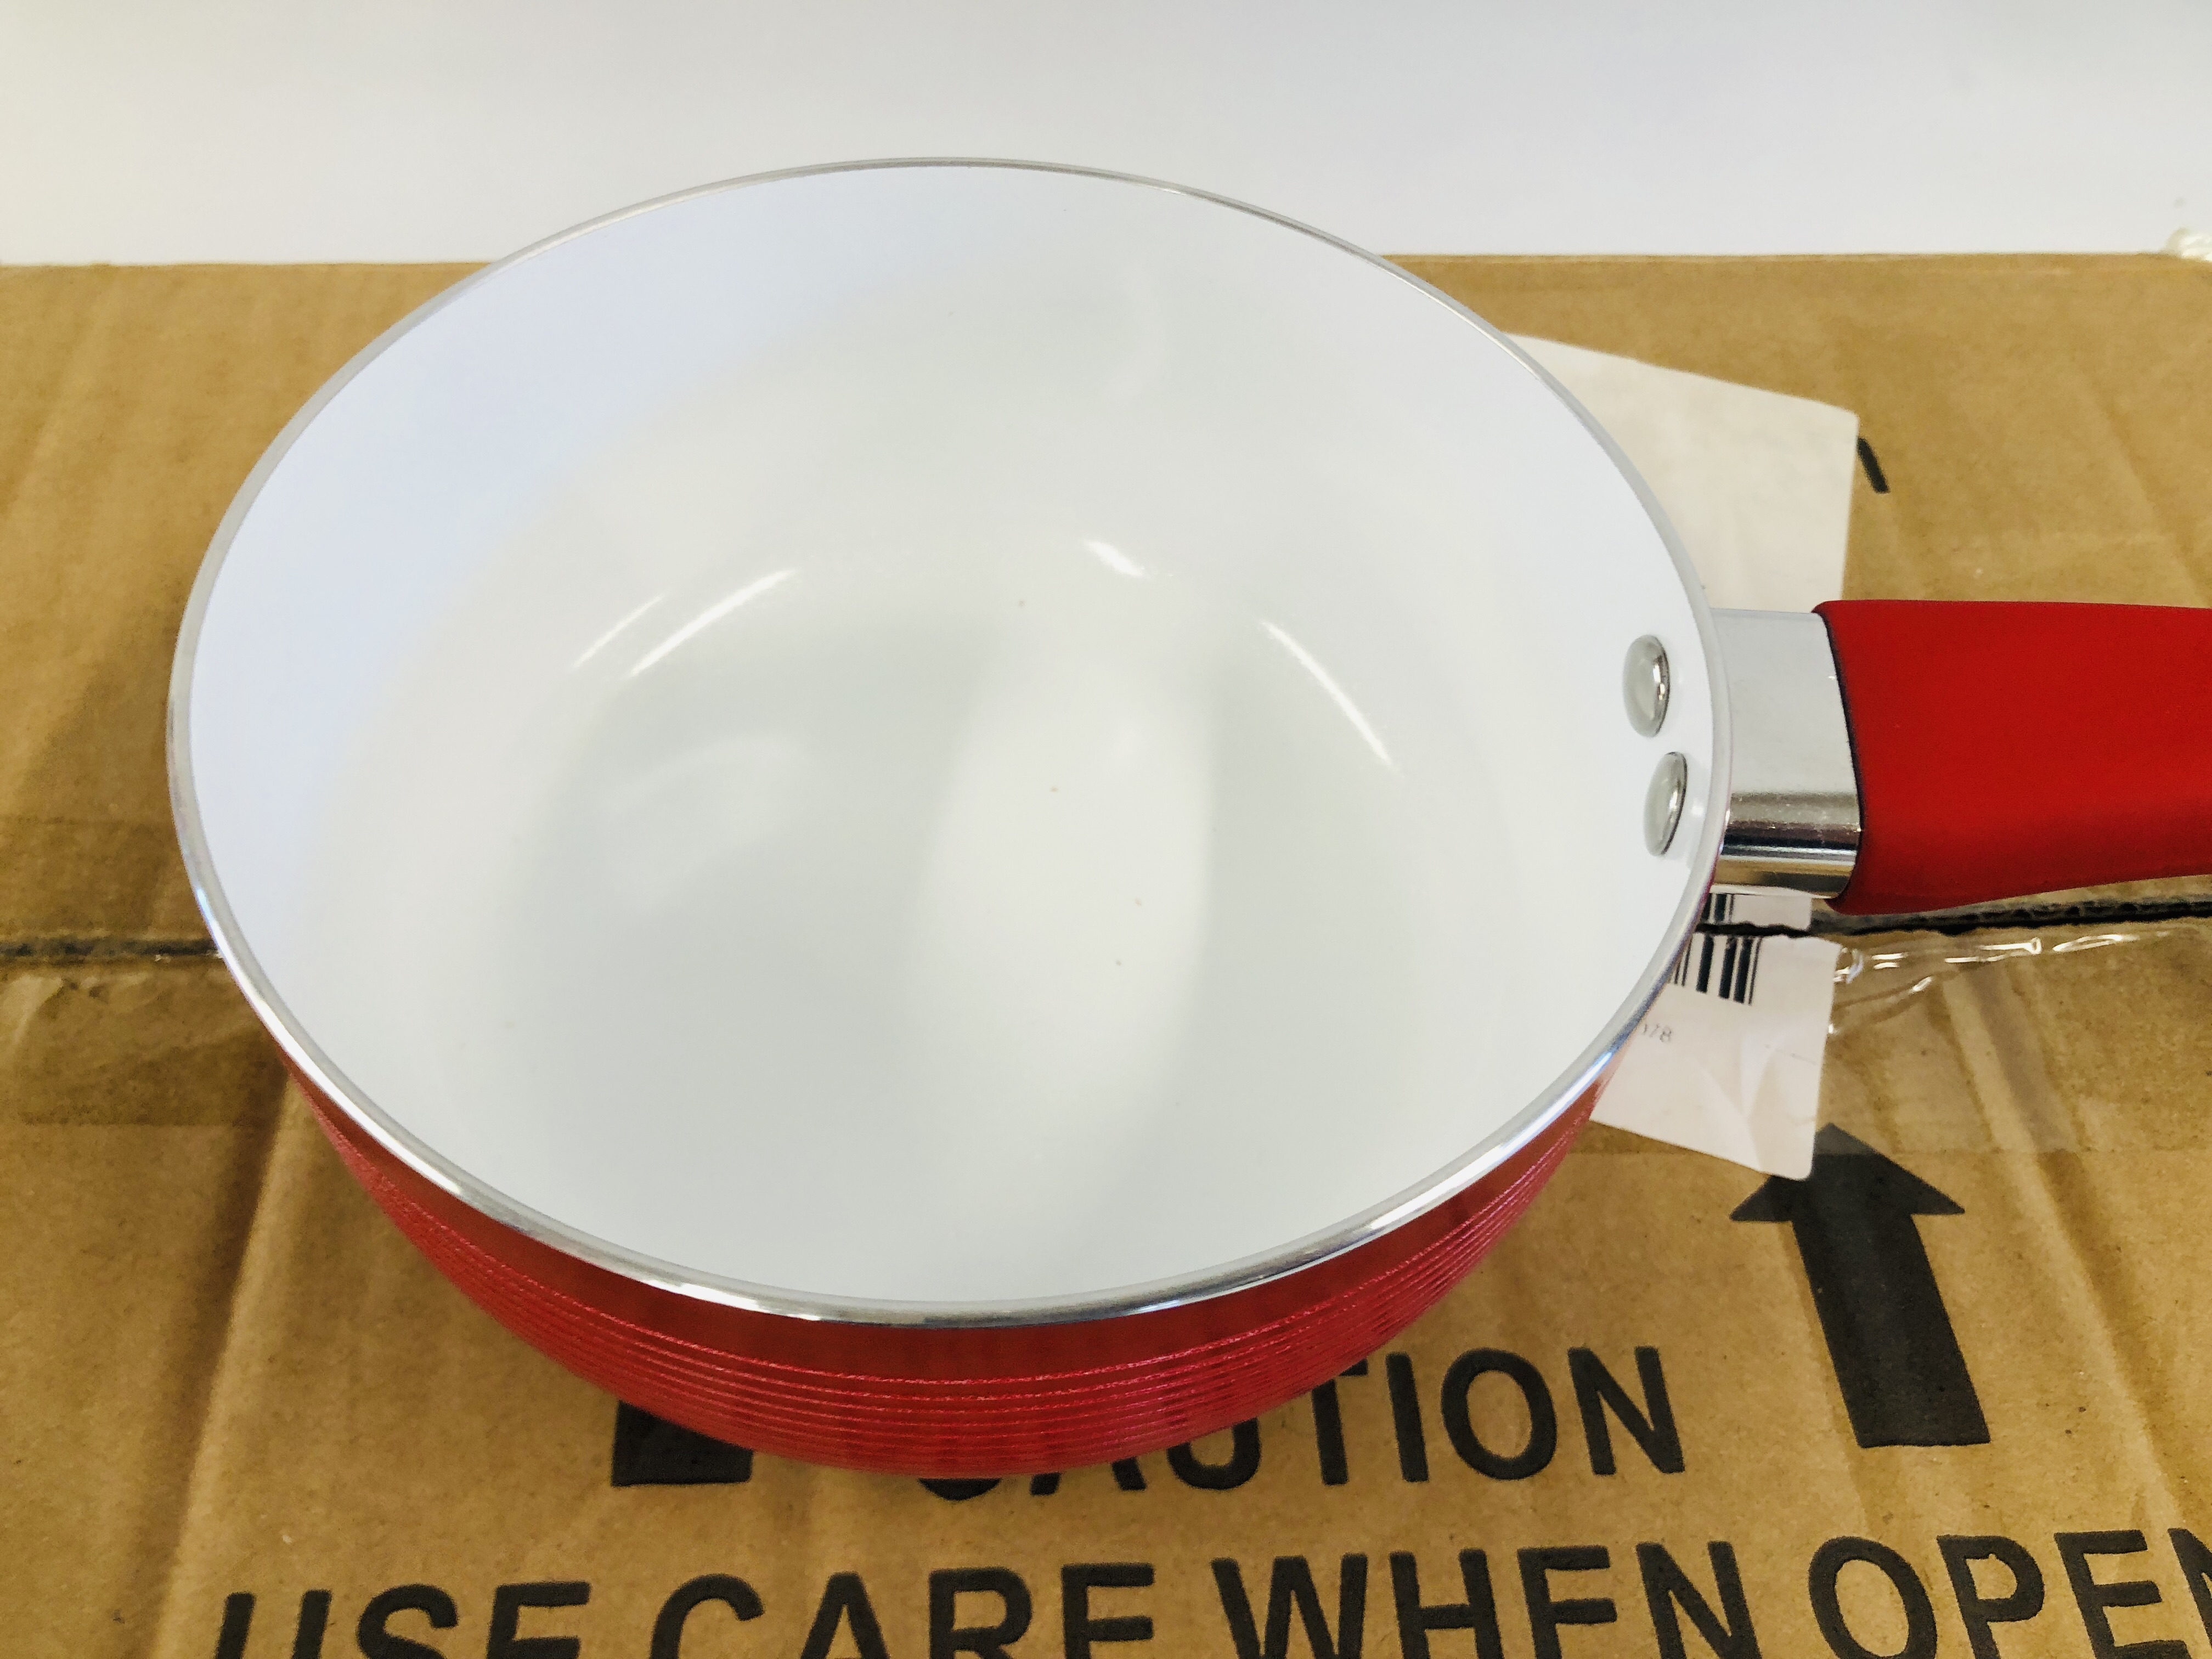 A BOXED AS NEW "STUDIO" 5 PIECE RIBBED CERAMIC NON STICK PAN SET, IN A RED FINISH. - Image 3 of 4